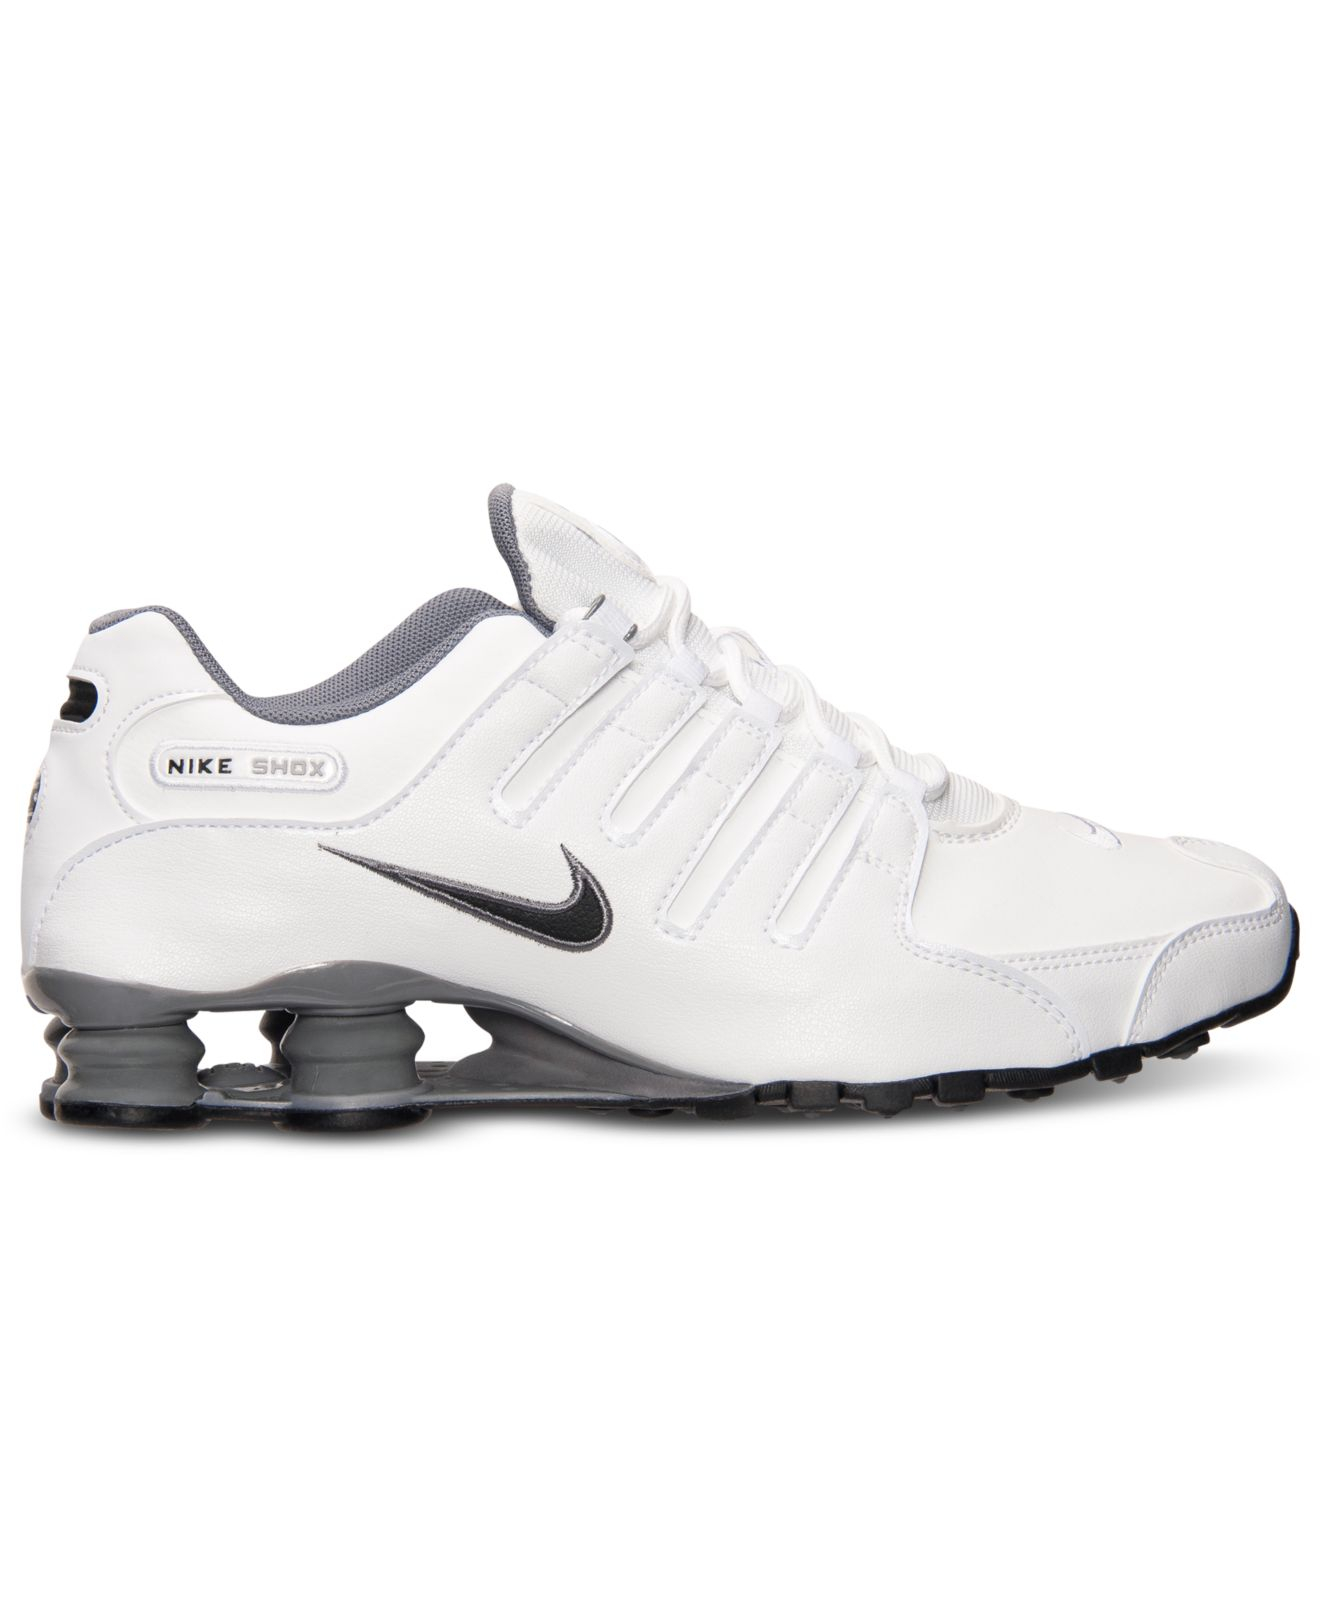 Lyst - Nike Men'S Shox Nz Running Sneakers From Finish Line in White ...